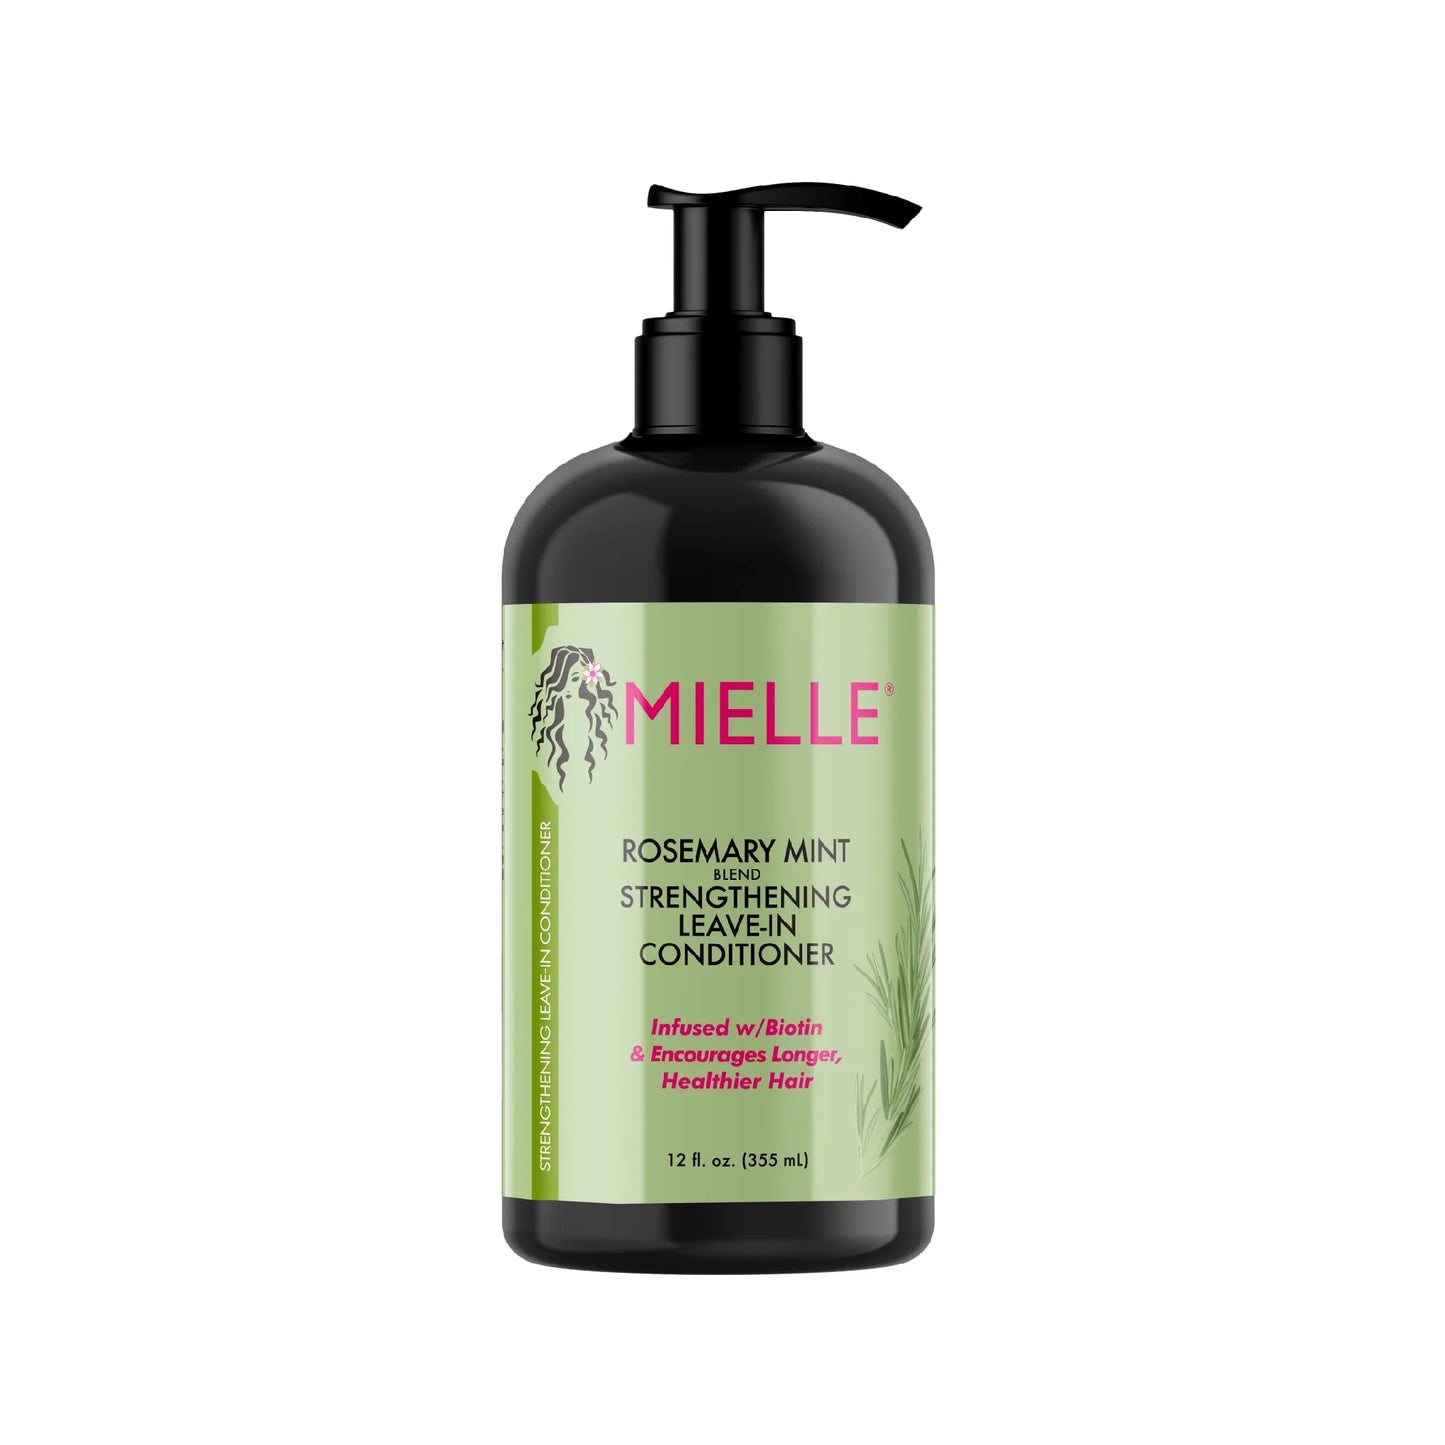 Mielle Organics - Rosemary Mint - Leave-in Conditioner | DjieFall